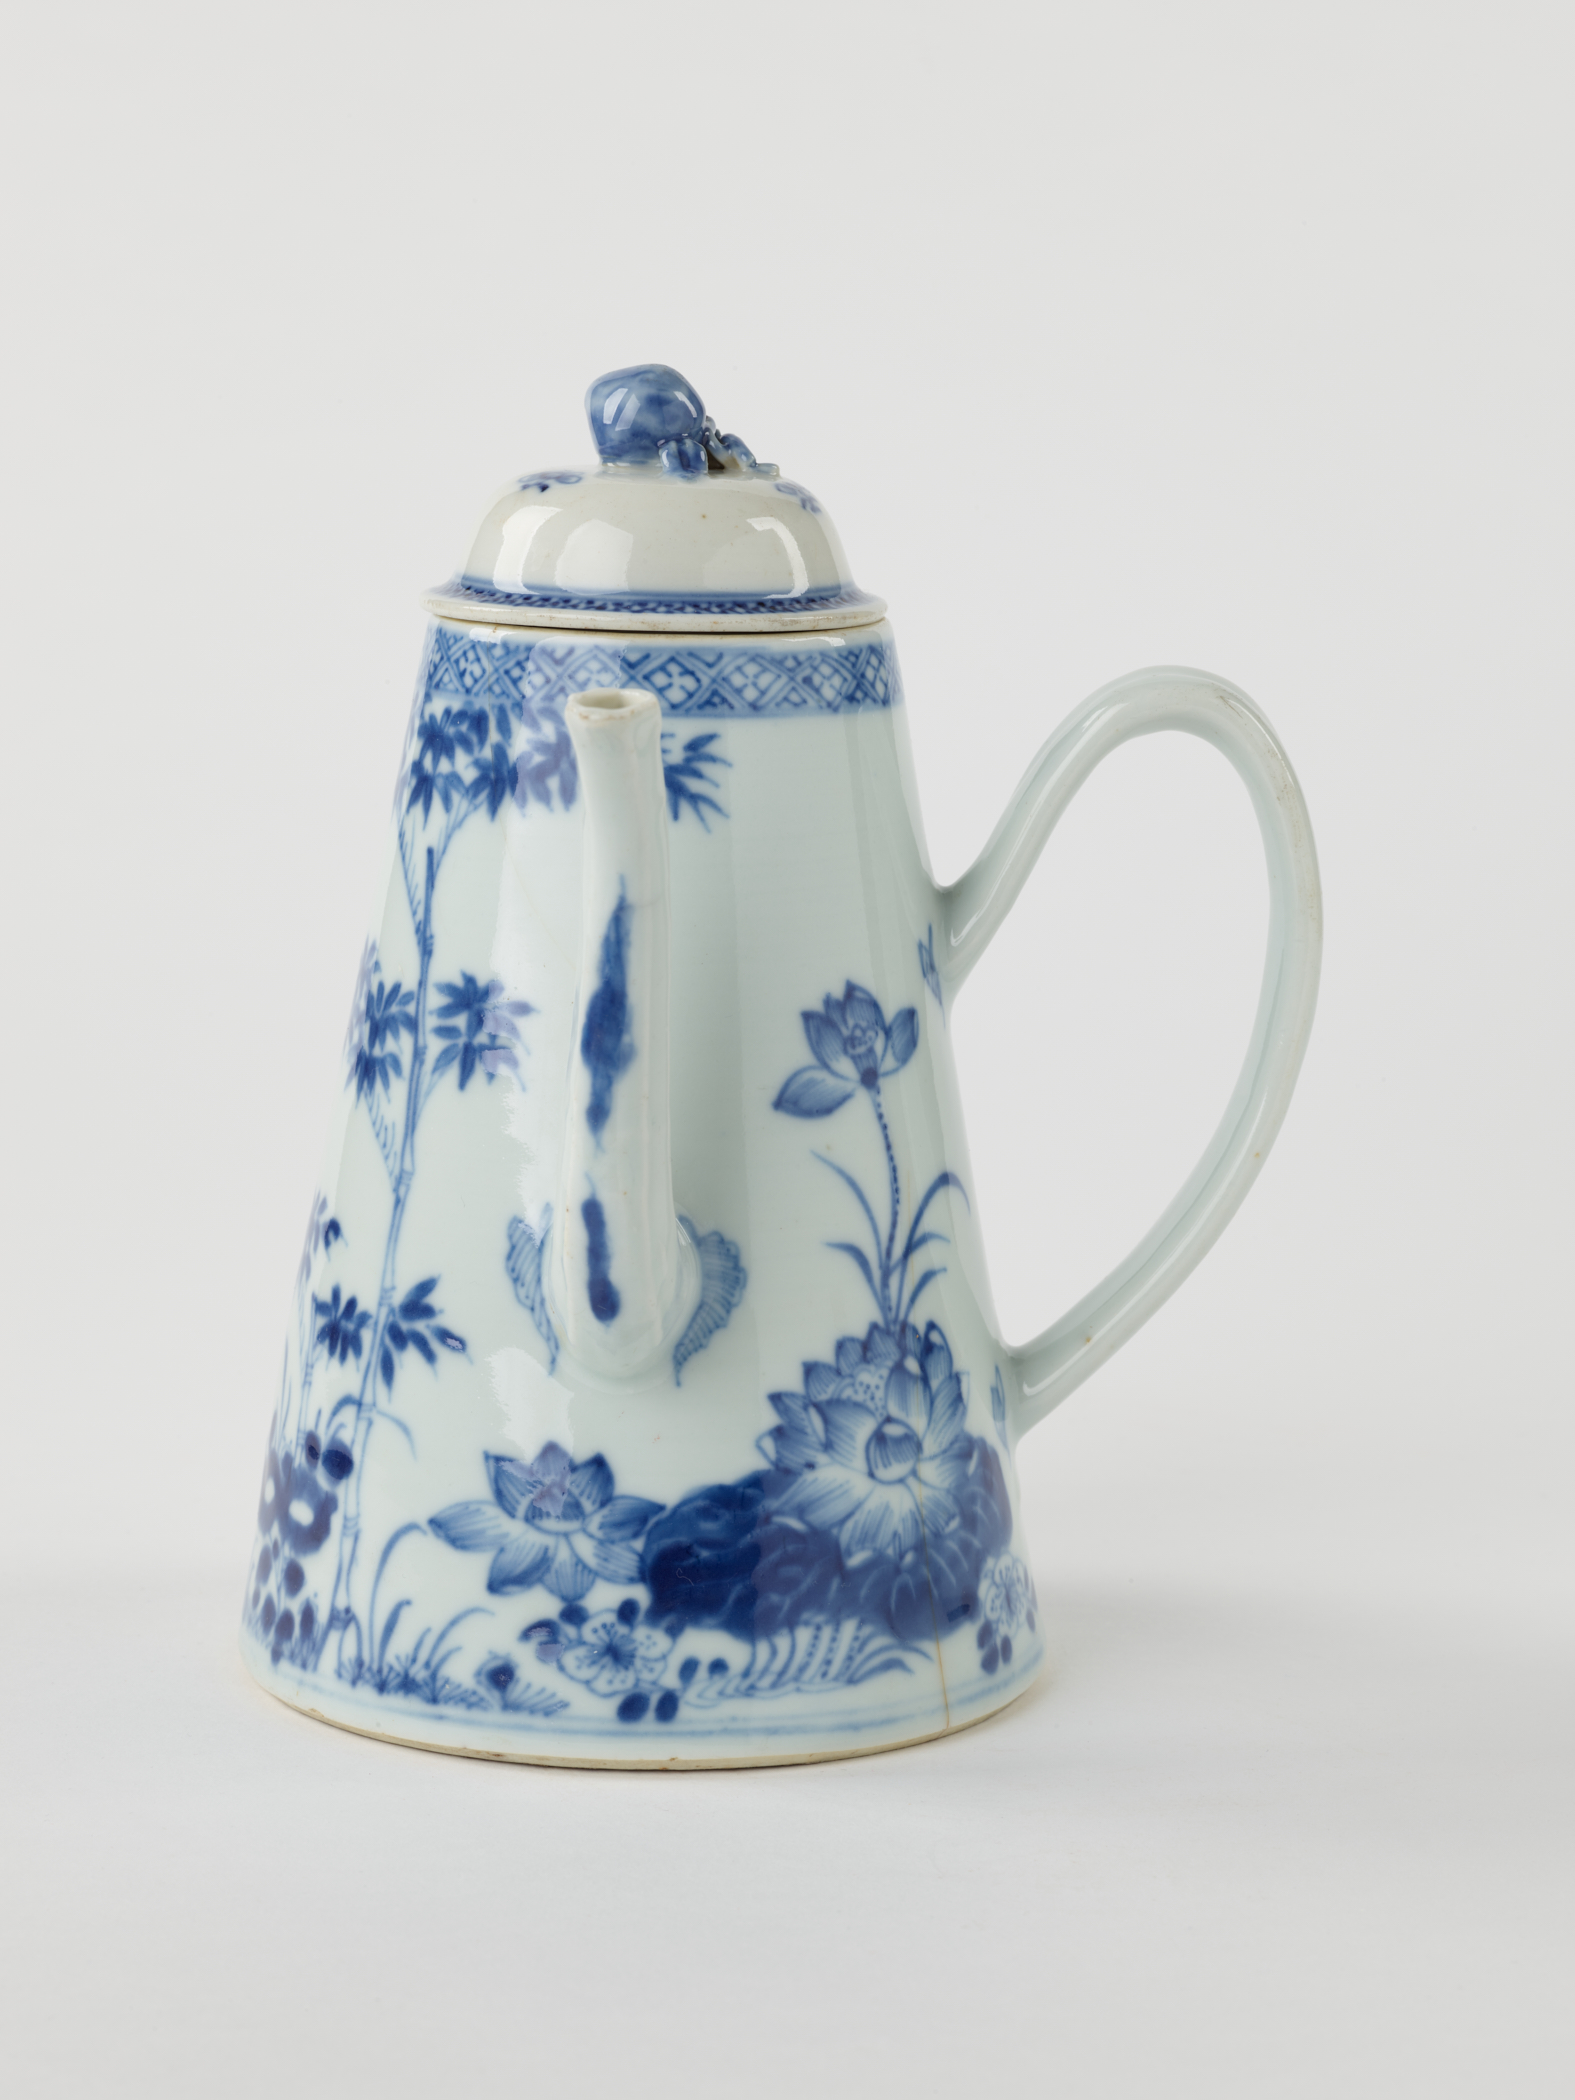 /A%20white%20and%20blue%20teapot%20with%20floral%20decorations%2C%20a%20lid%20with%20a%20small%20semi%20spherical%20finial%2C%20spout%2C%20and%20a%20handle%20which%20is%20located%20approximately%2090%20degrees%20from%20the%20spout.